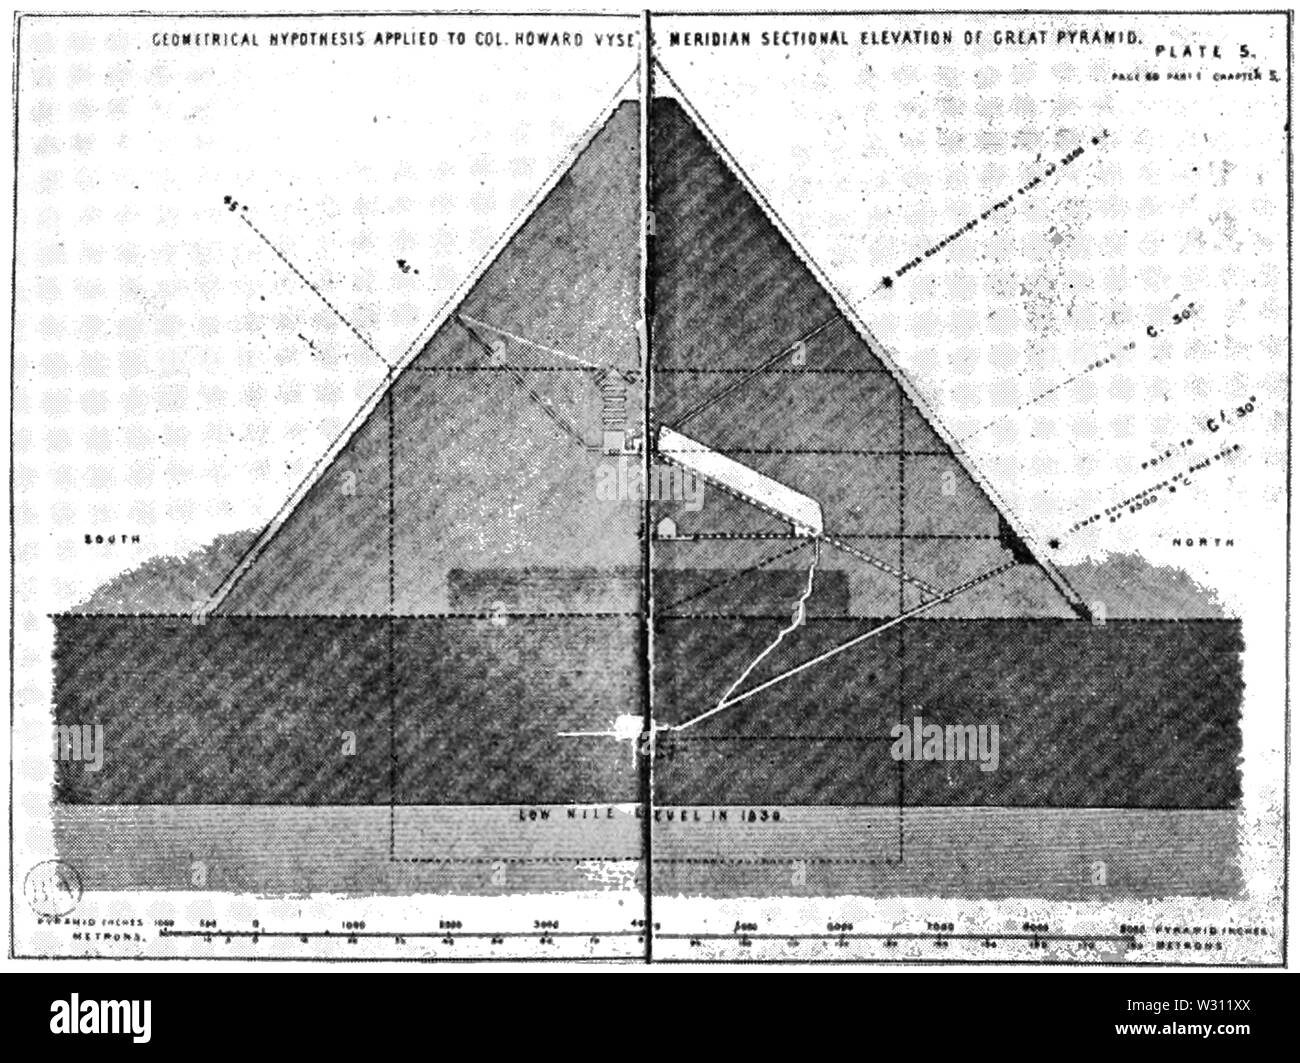 PSM V80 D460 Geometric hypothesis of the sectional elevation of the great pyramid Stock Photo